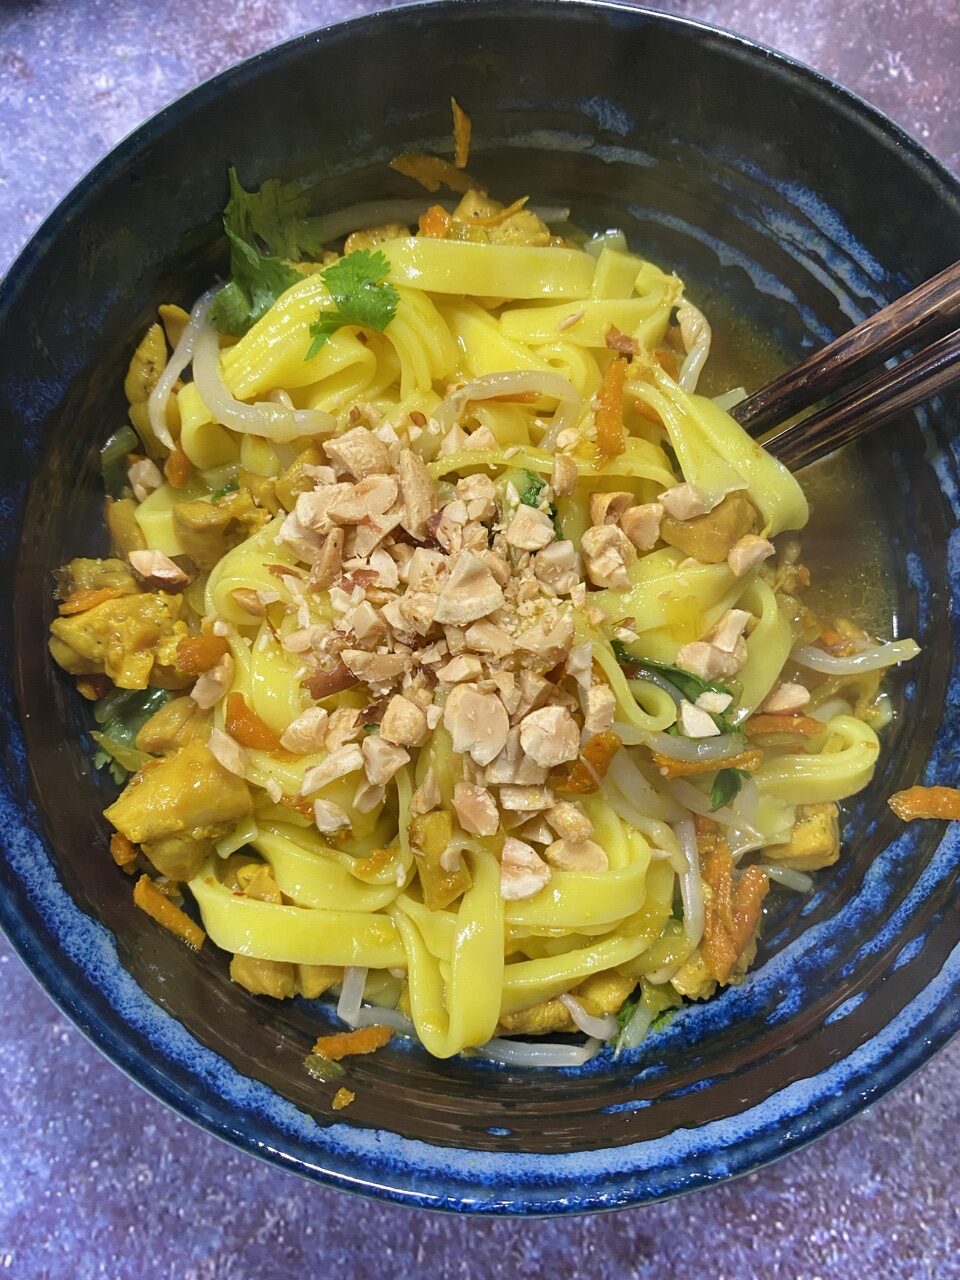 F4F42DC6 5865 44DF AA65 074D8E5EC76F e1604175058162 - Mì Quàng Gà- Vietnamese Turmeric Noodles with Chicken